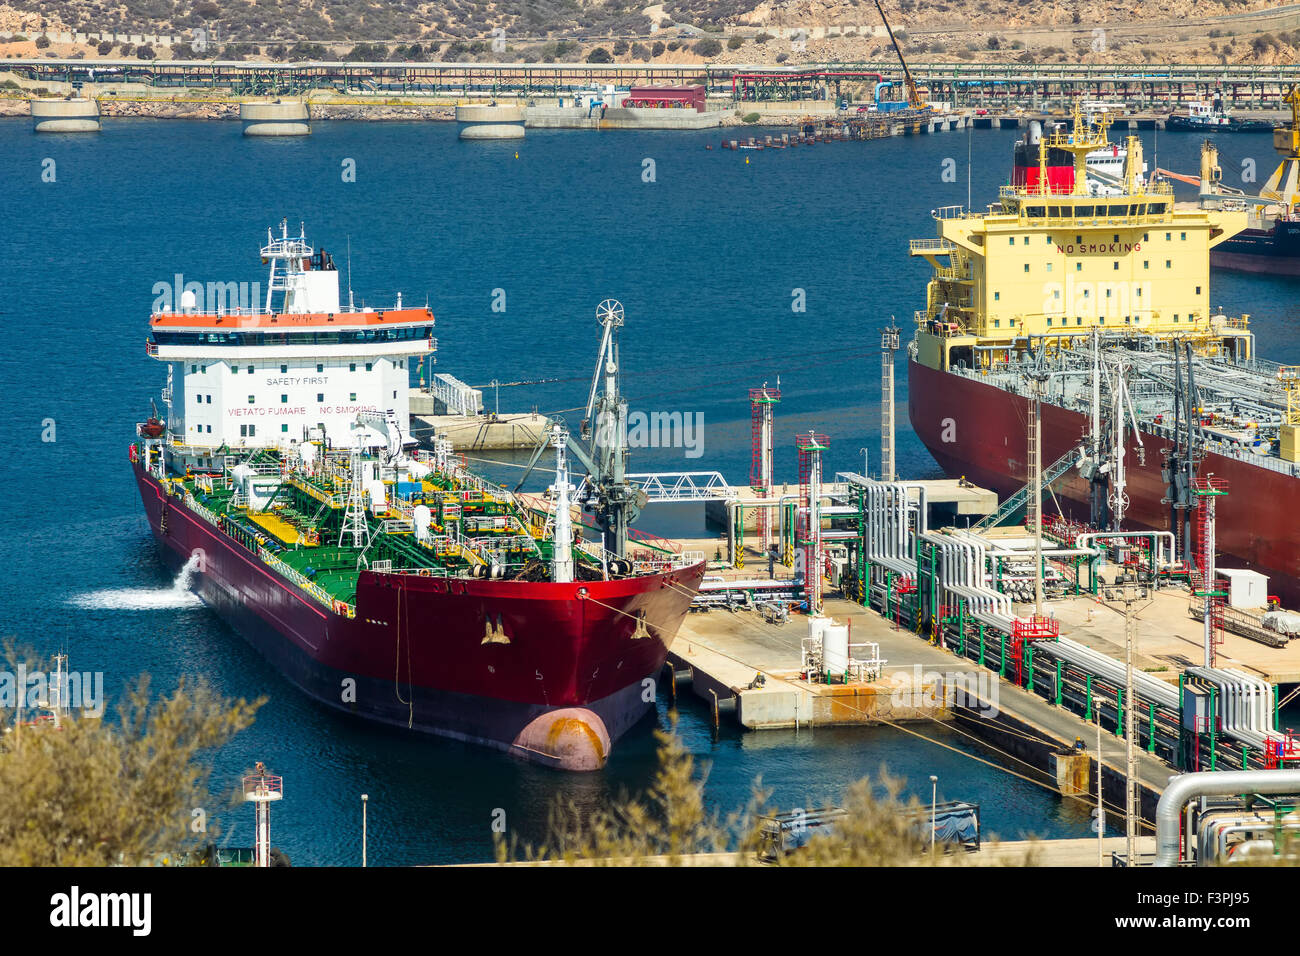 large tankers unloading crude oil Stock Photo